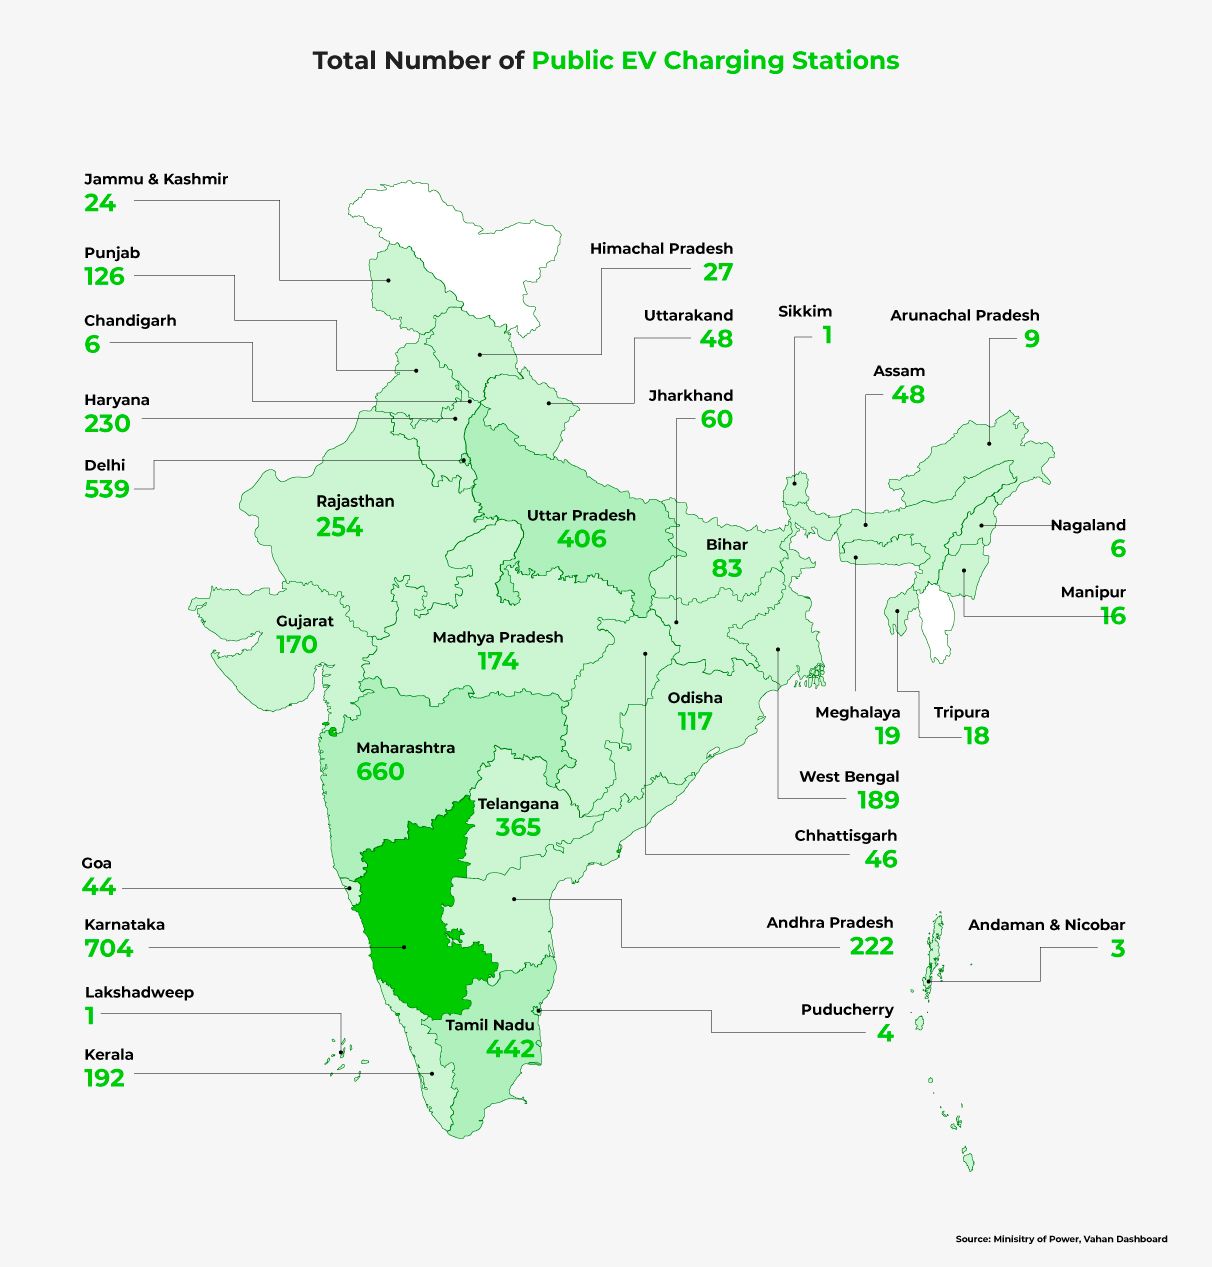 A map of India showing how many public charging stations each state currently has